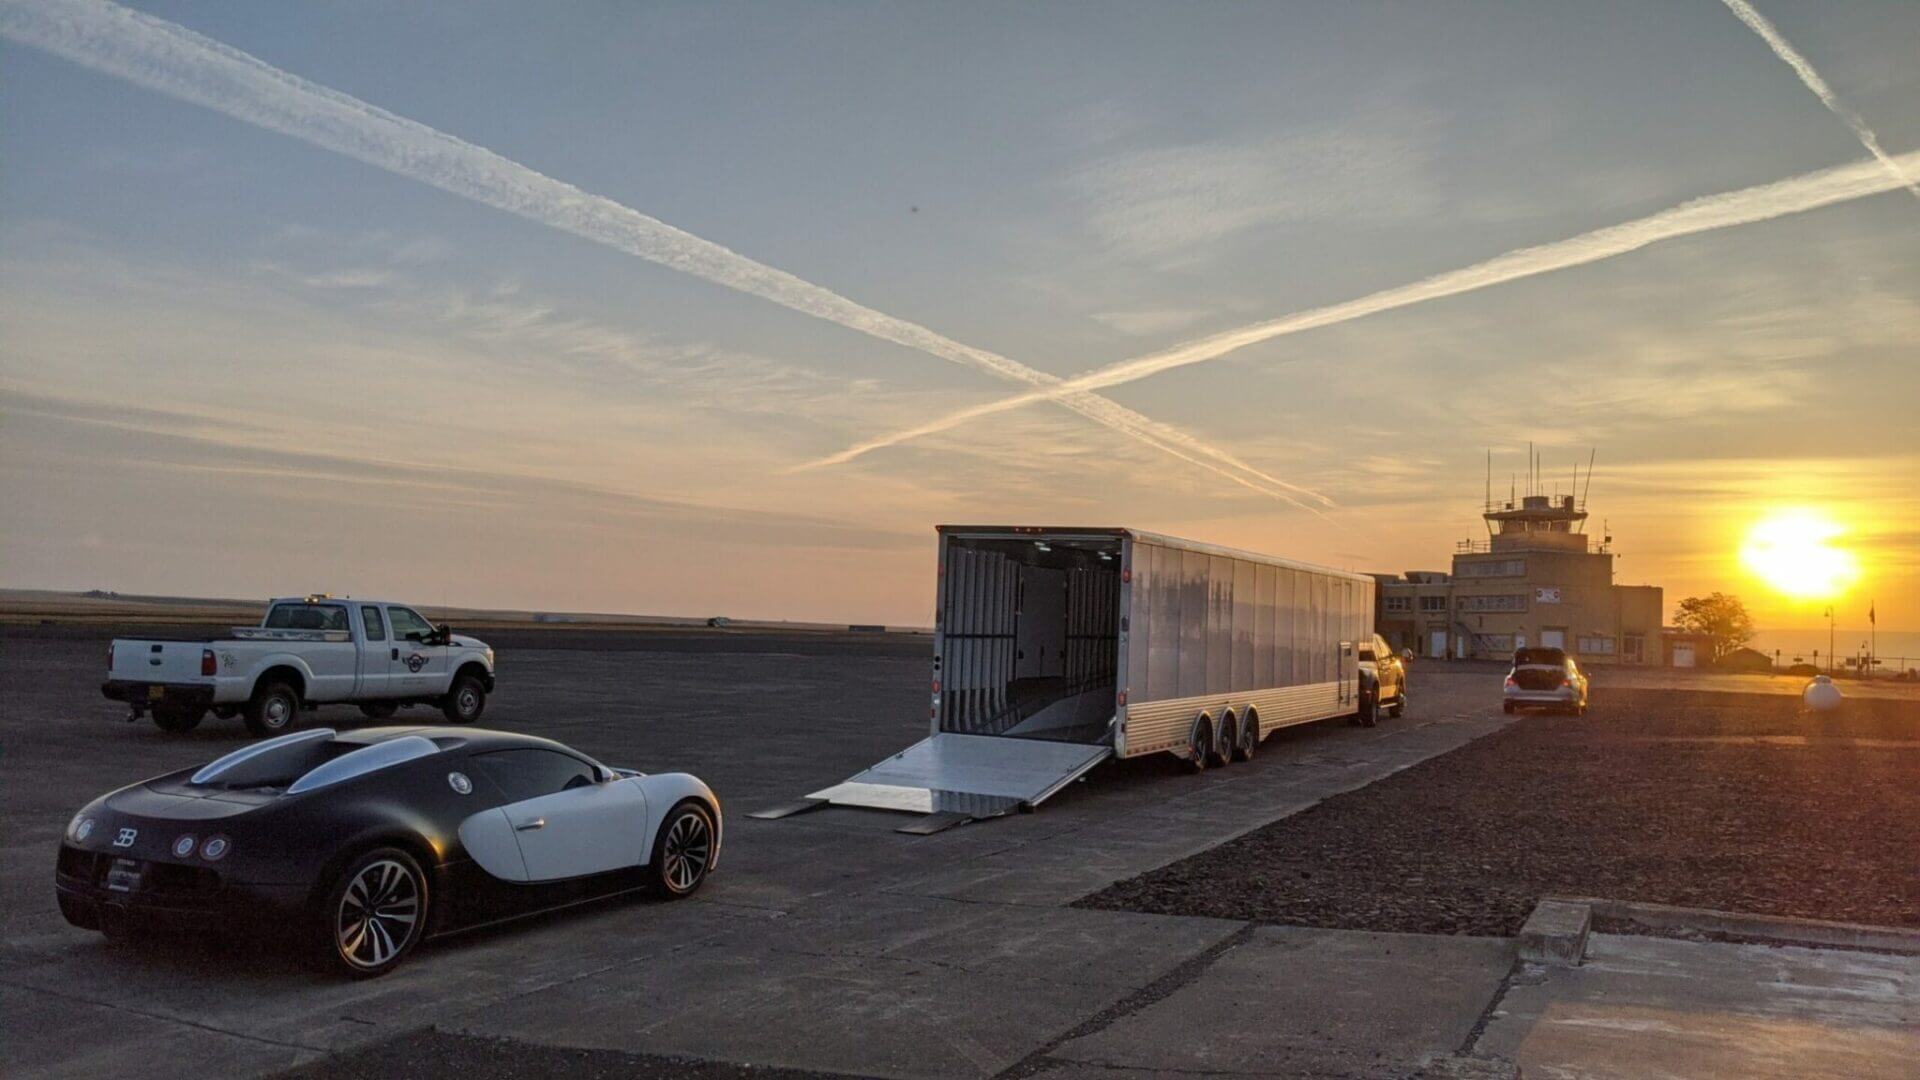 Bugatti Being Loaded into Enclosed Trailer During Sunset | National Transport Services